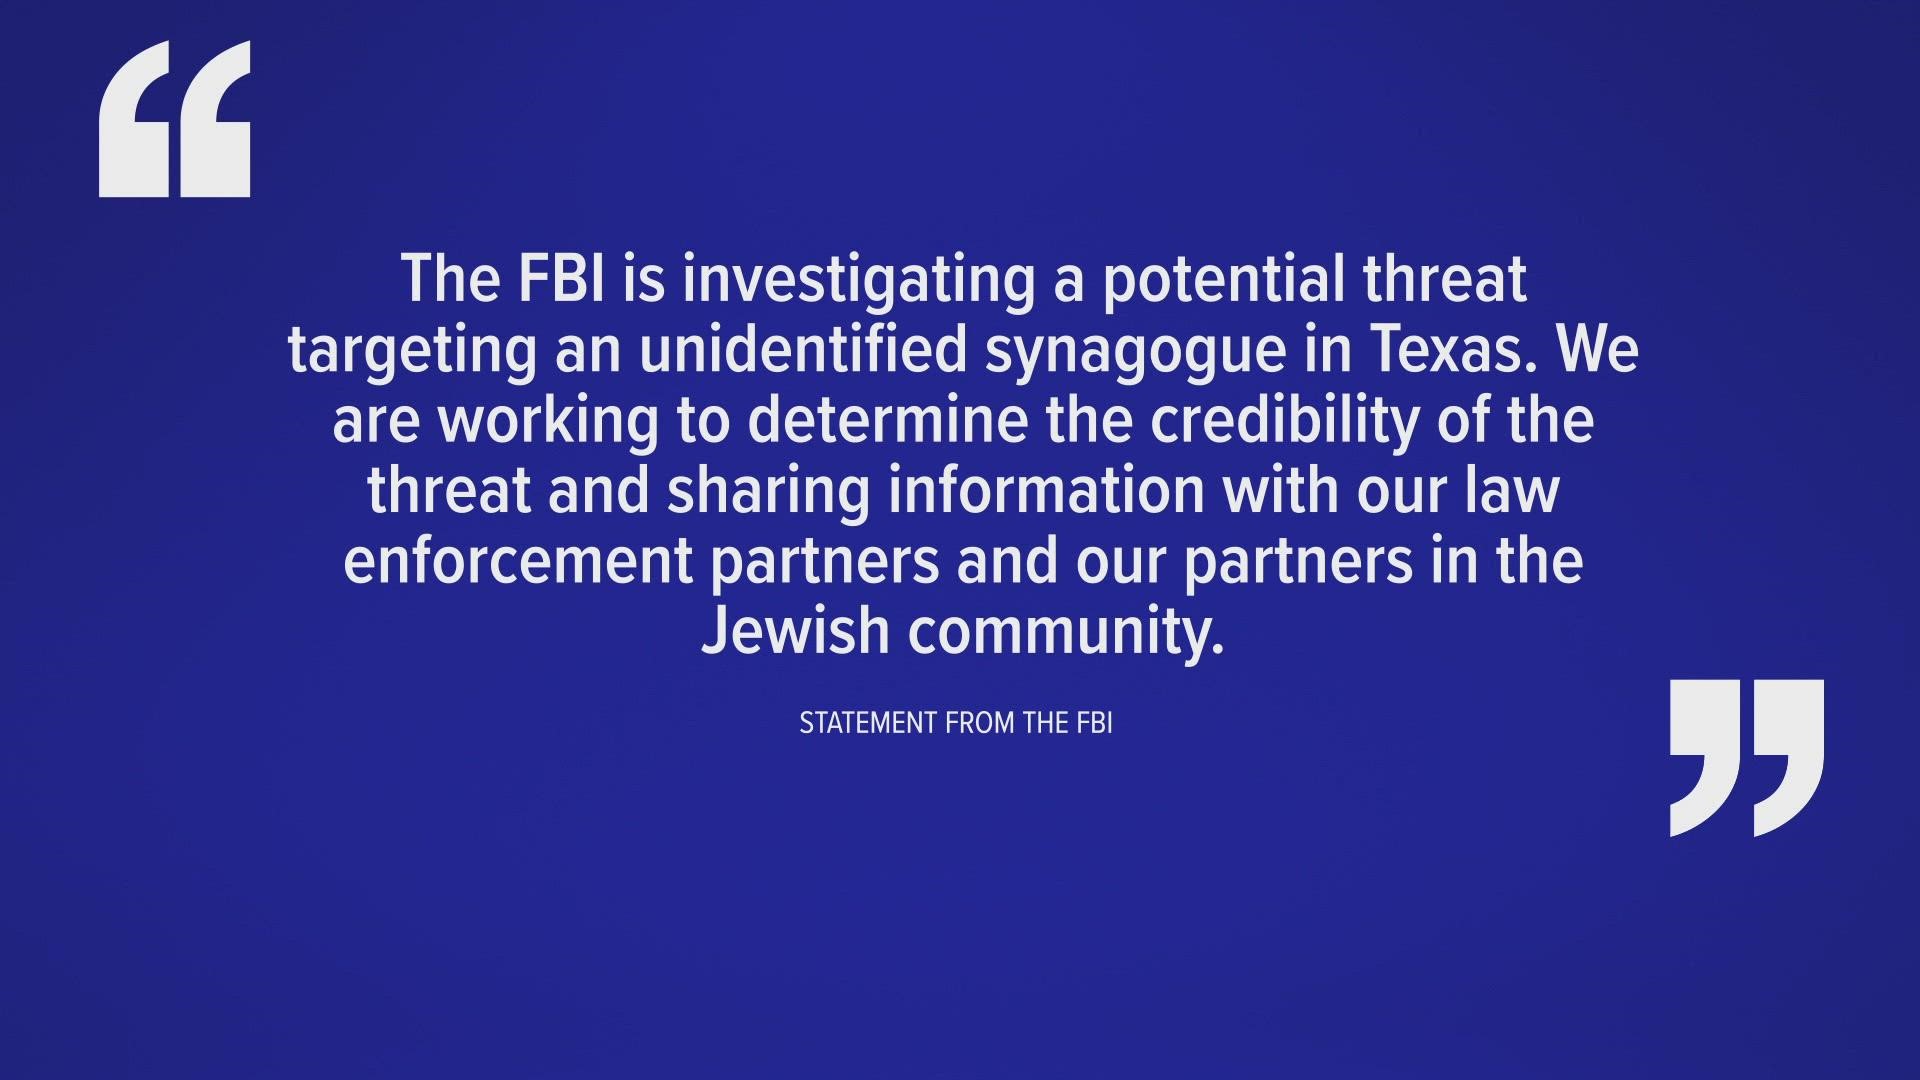 While the FBI couldn't specify which synagogue in Texas was receiving the threat, at least one in San Antonio canceled services on Saturday.